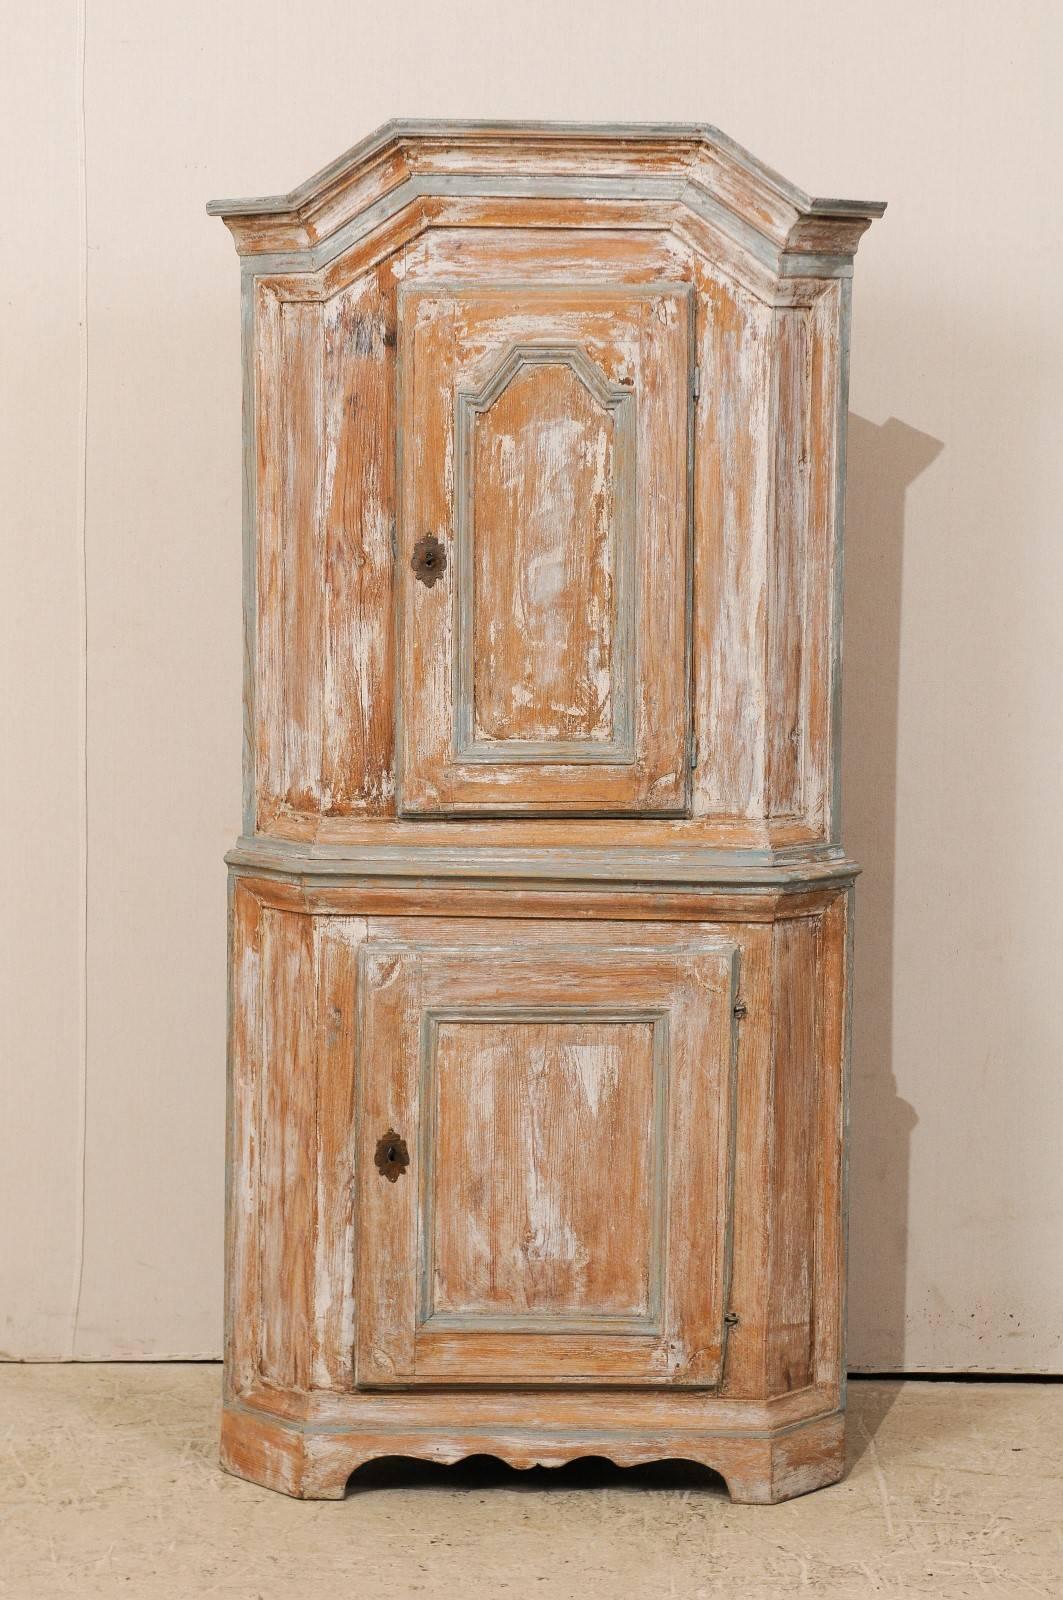 A Swedish mid-18th century late Baroque corner cabinet. This Swedish Baroque cabinet, circa 1730-1740, features a pediment cornice, carved cupboard doors and scalloped base. There is a single top cupboard board with a single bottom cupboard door and